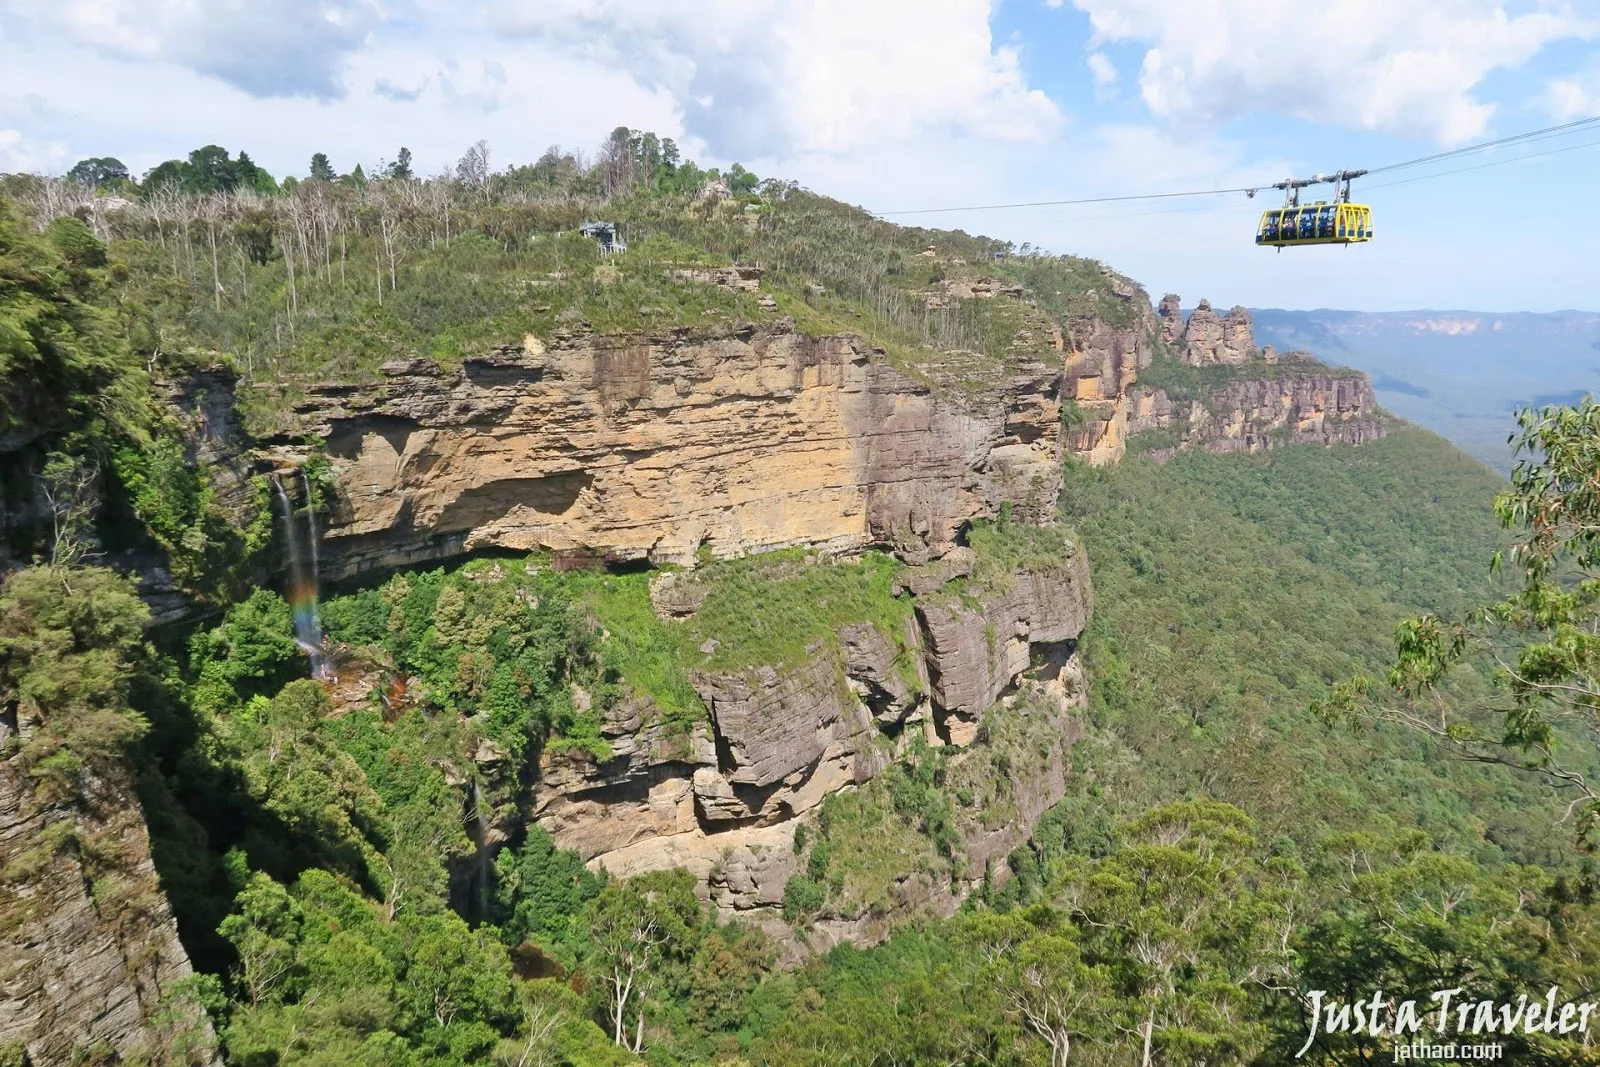 Sydney-best-top-tourist-attraction-spots-Blue-Mountains-National-Park-Scenic-World-Three-Sisters-lookouts-tickets-cable-car-train-things-to-do-tour